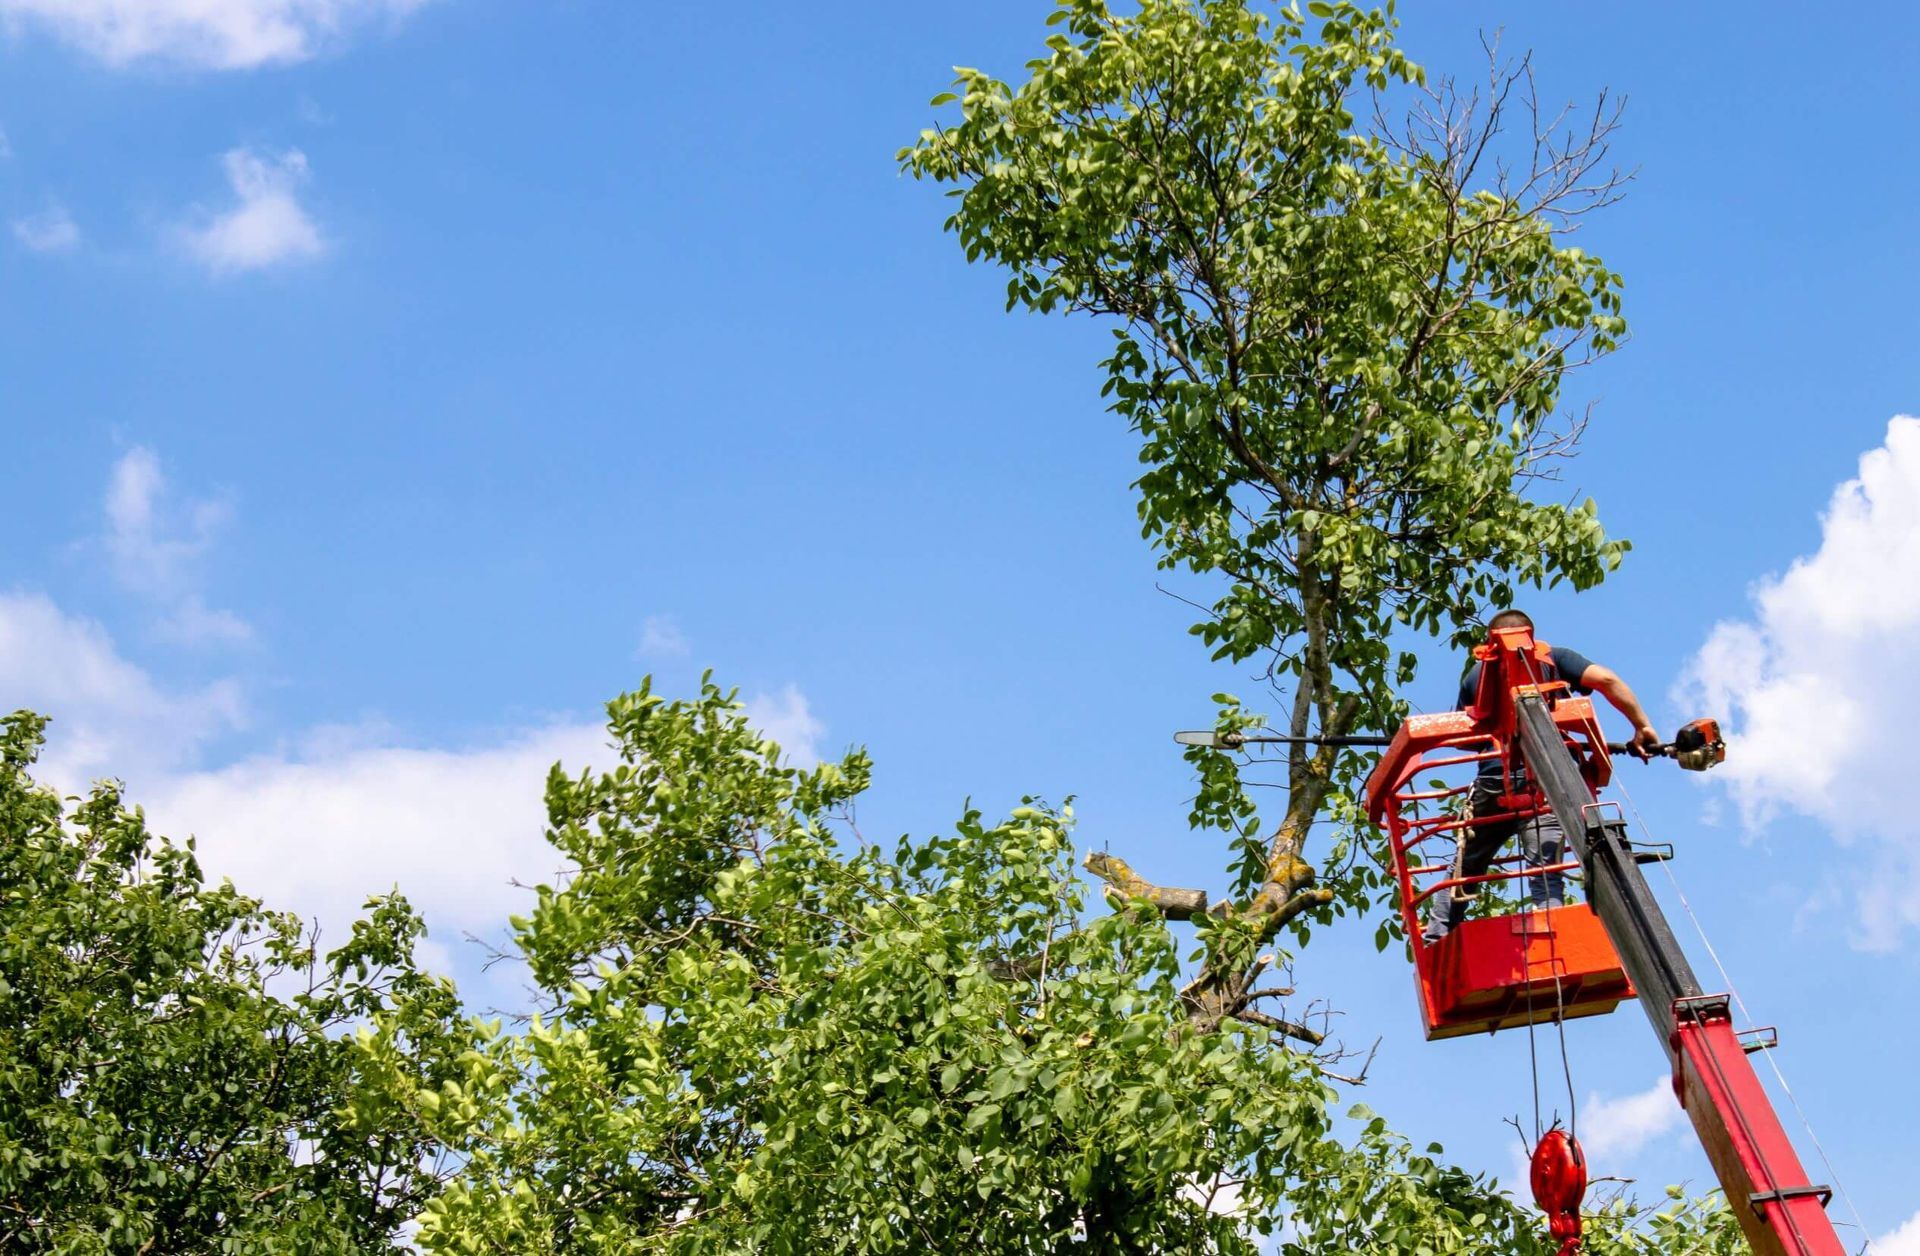 tree removal new augusta ms, arborist in new augusta ms, new augusta tree service